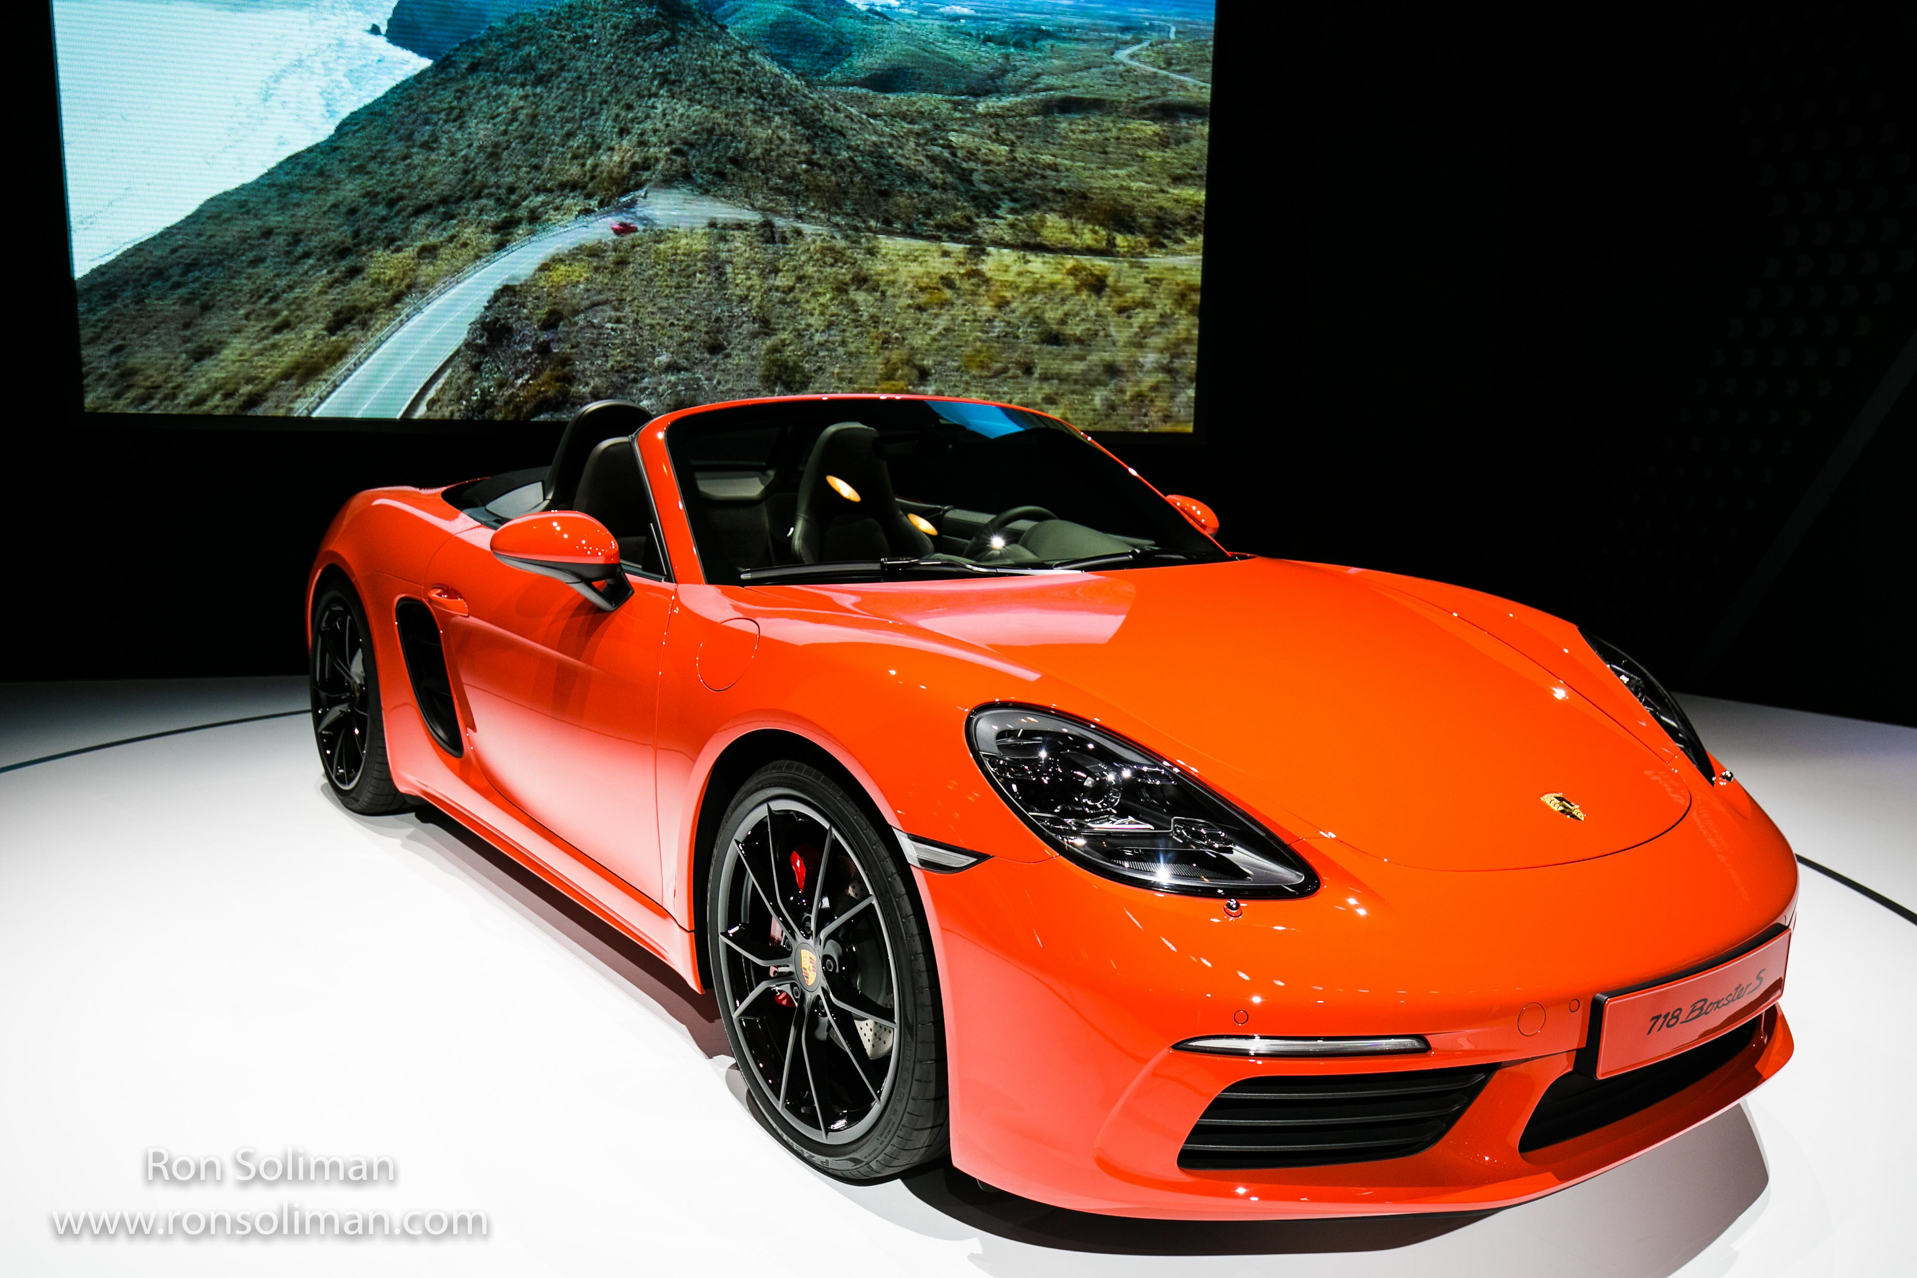 Best photos at NEW YORK AUTO SHOW